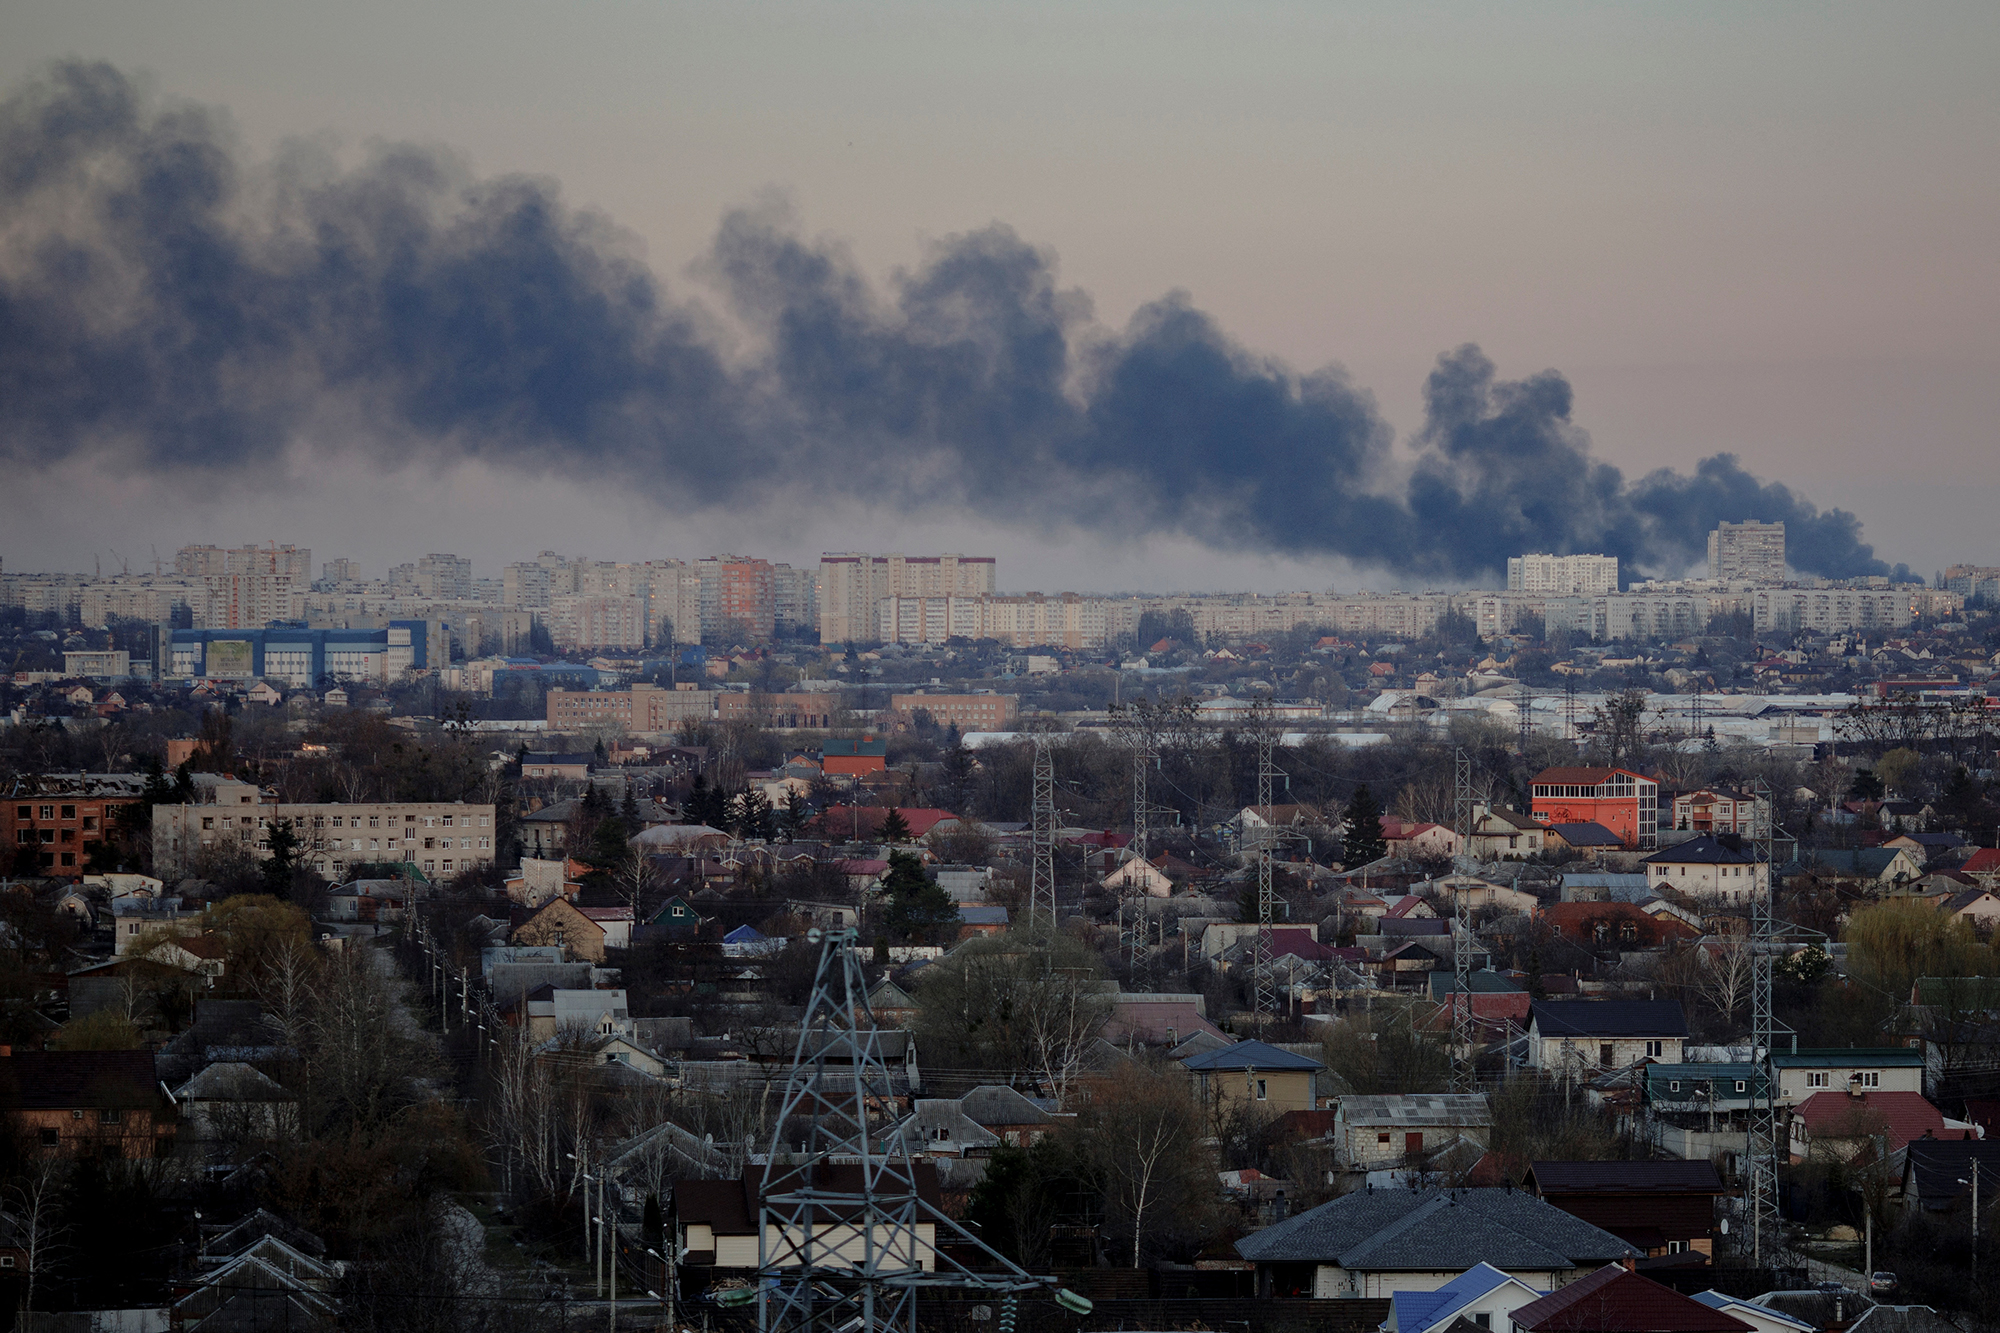 Smoke rises from the Kulinichi bread factory after it was hit by shelling in Kharkiv, Ukraine, onApril 7 2022. REUTERS/Thomas Peter